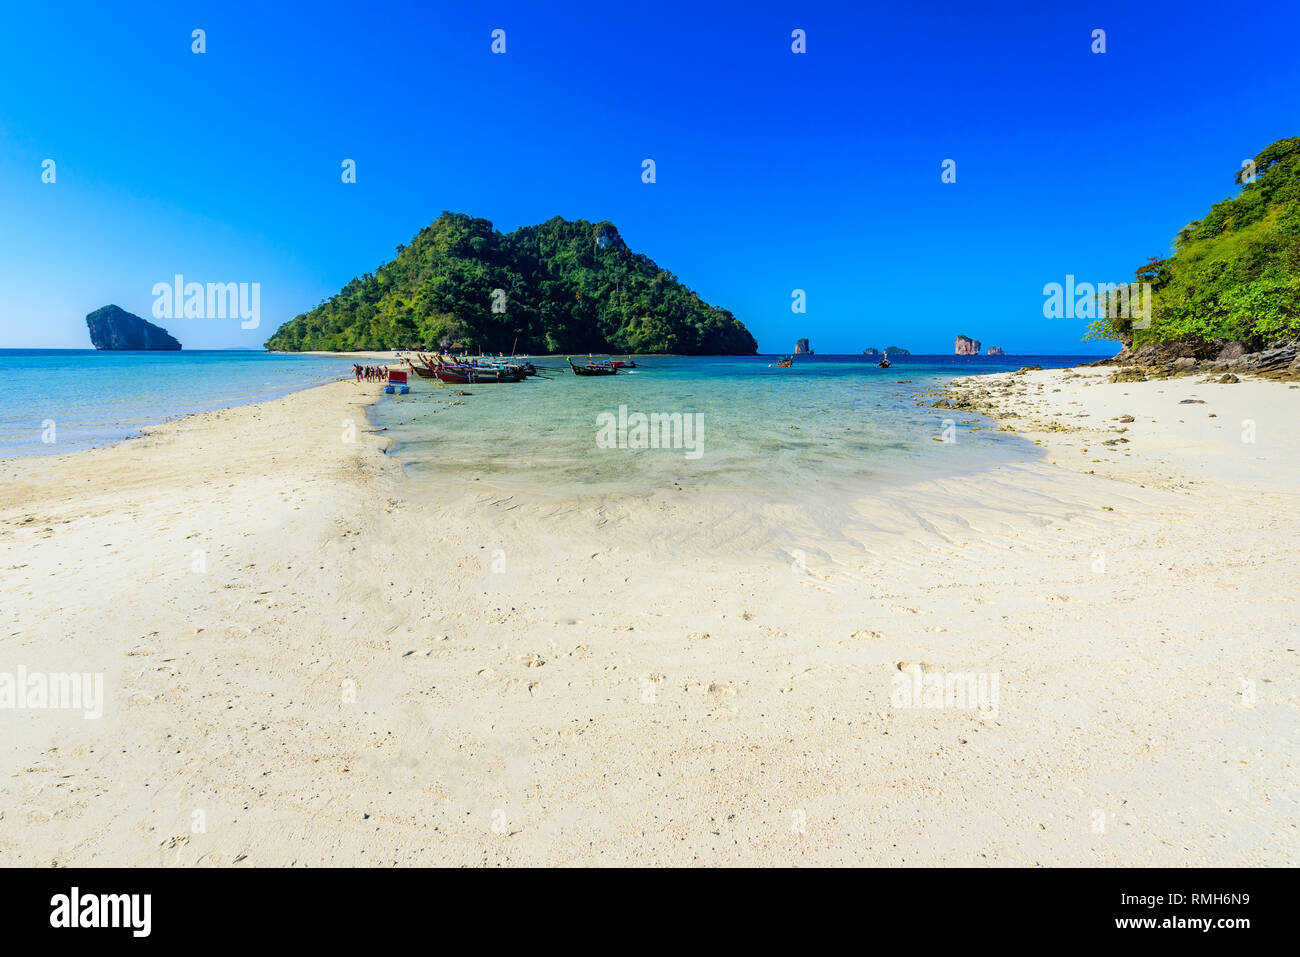 View to Chicken island. Paradise beach which connects 3 tropical islands together (Koh Kai, Koh Tup & Koh Mor). Andaman sea, Krabi province, Thailand. Stock Photo